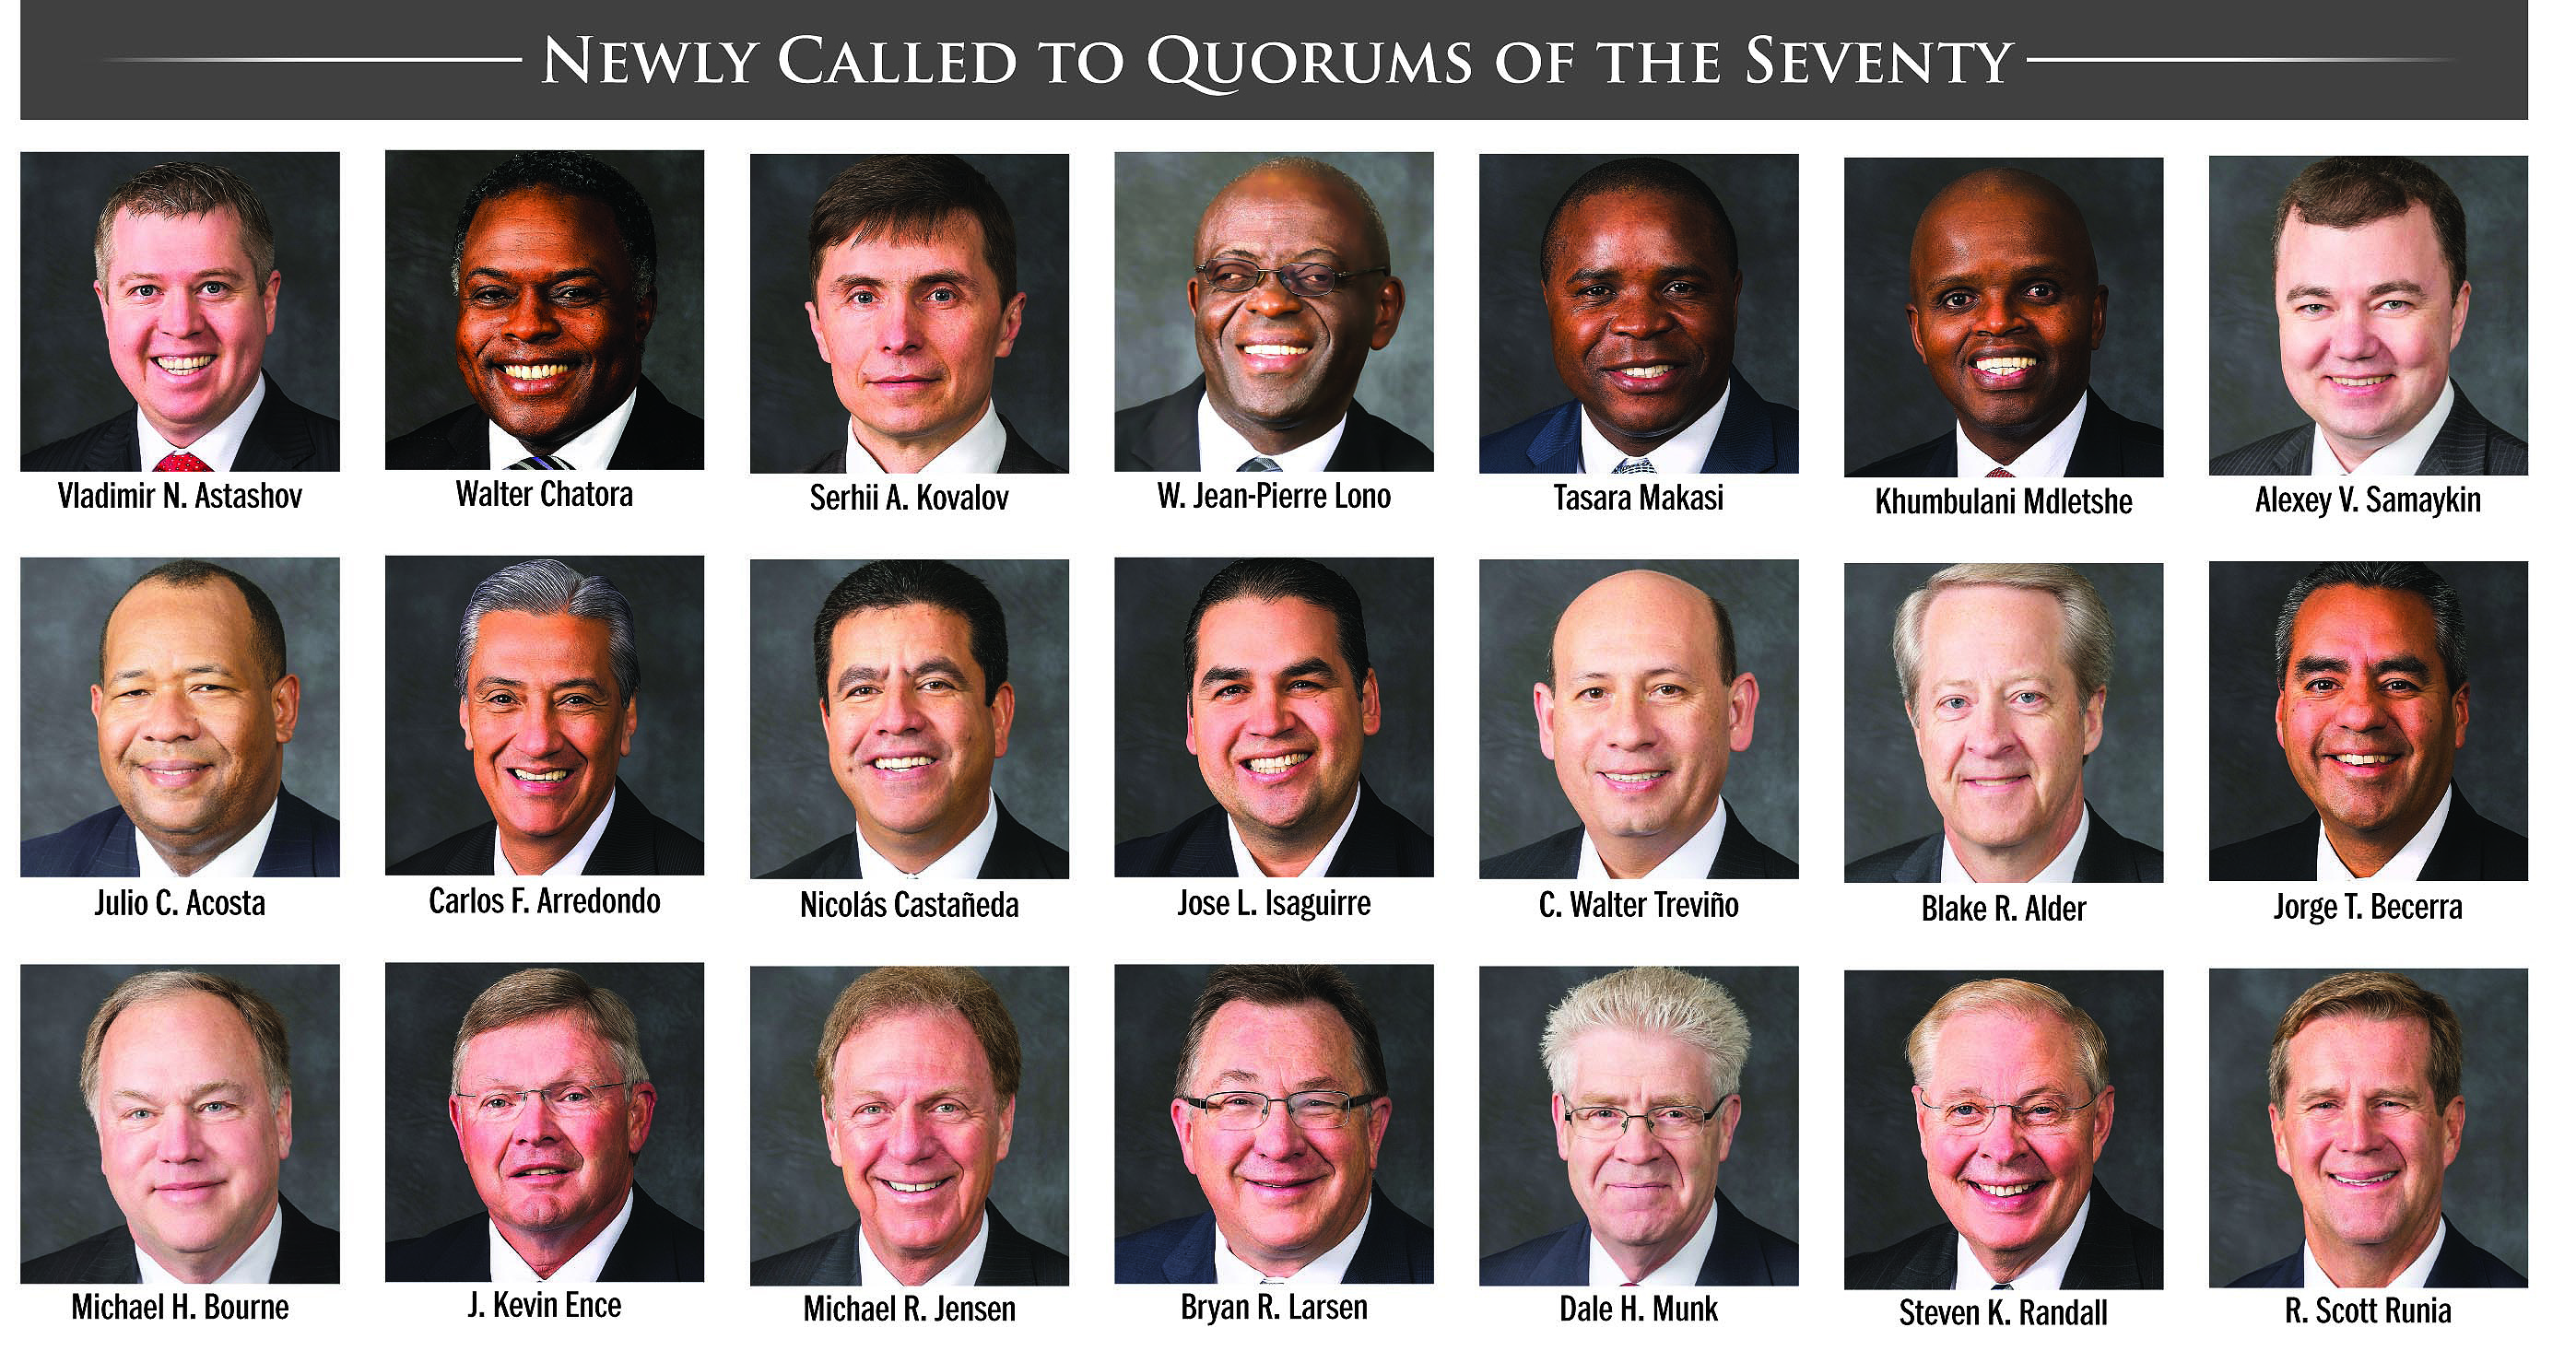 42 Area Leaders Called to Quorums of the Seventy Church News and Events